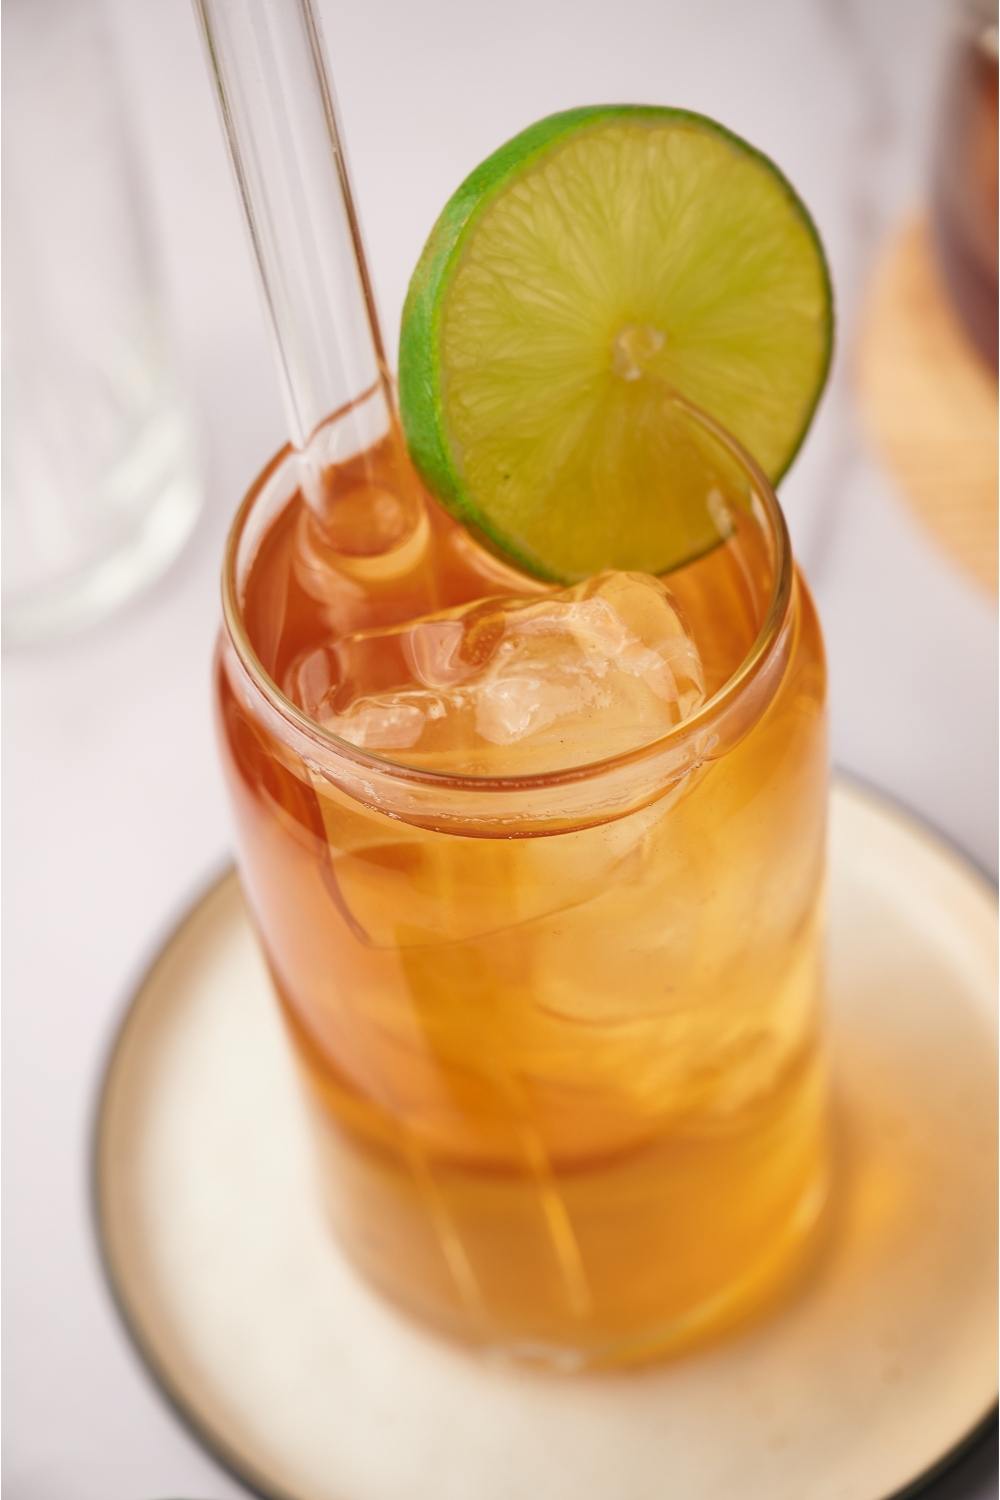 Close up of a glass of iced tea with ice cubes and a straw in it, garnished with a lime wheel.